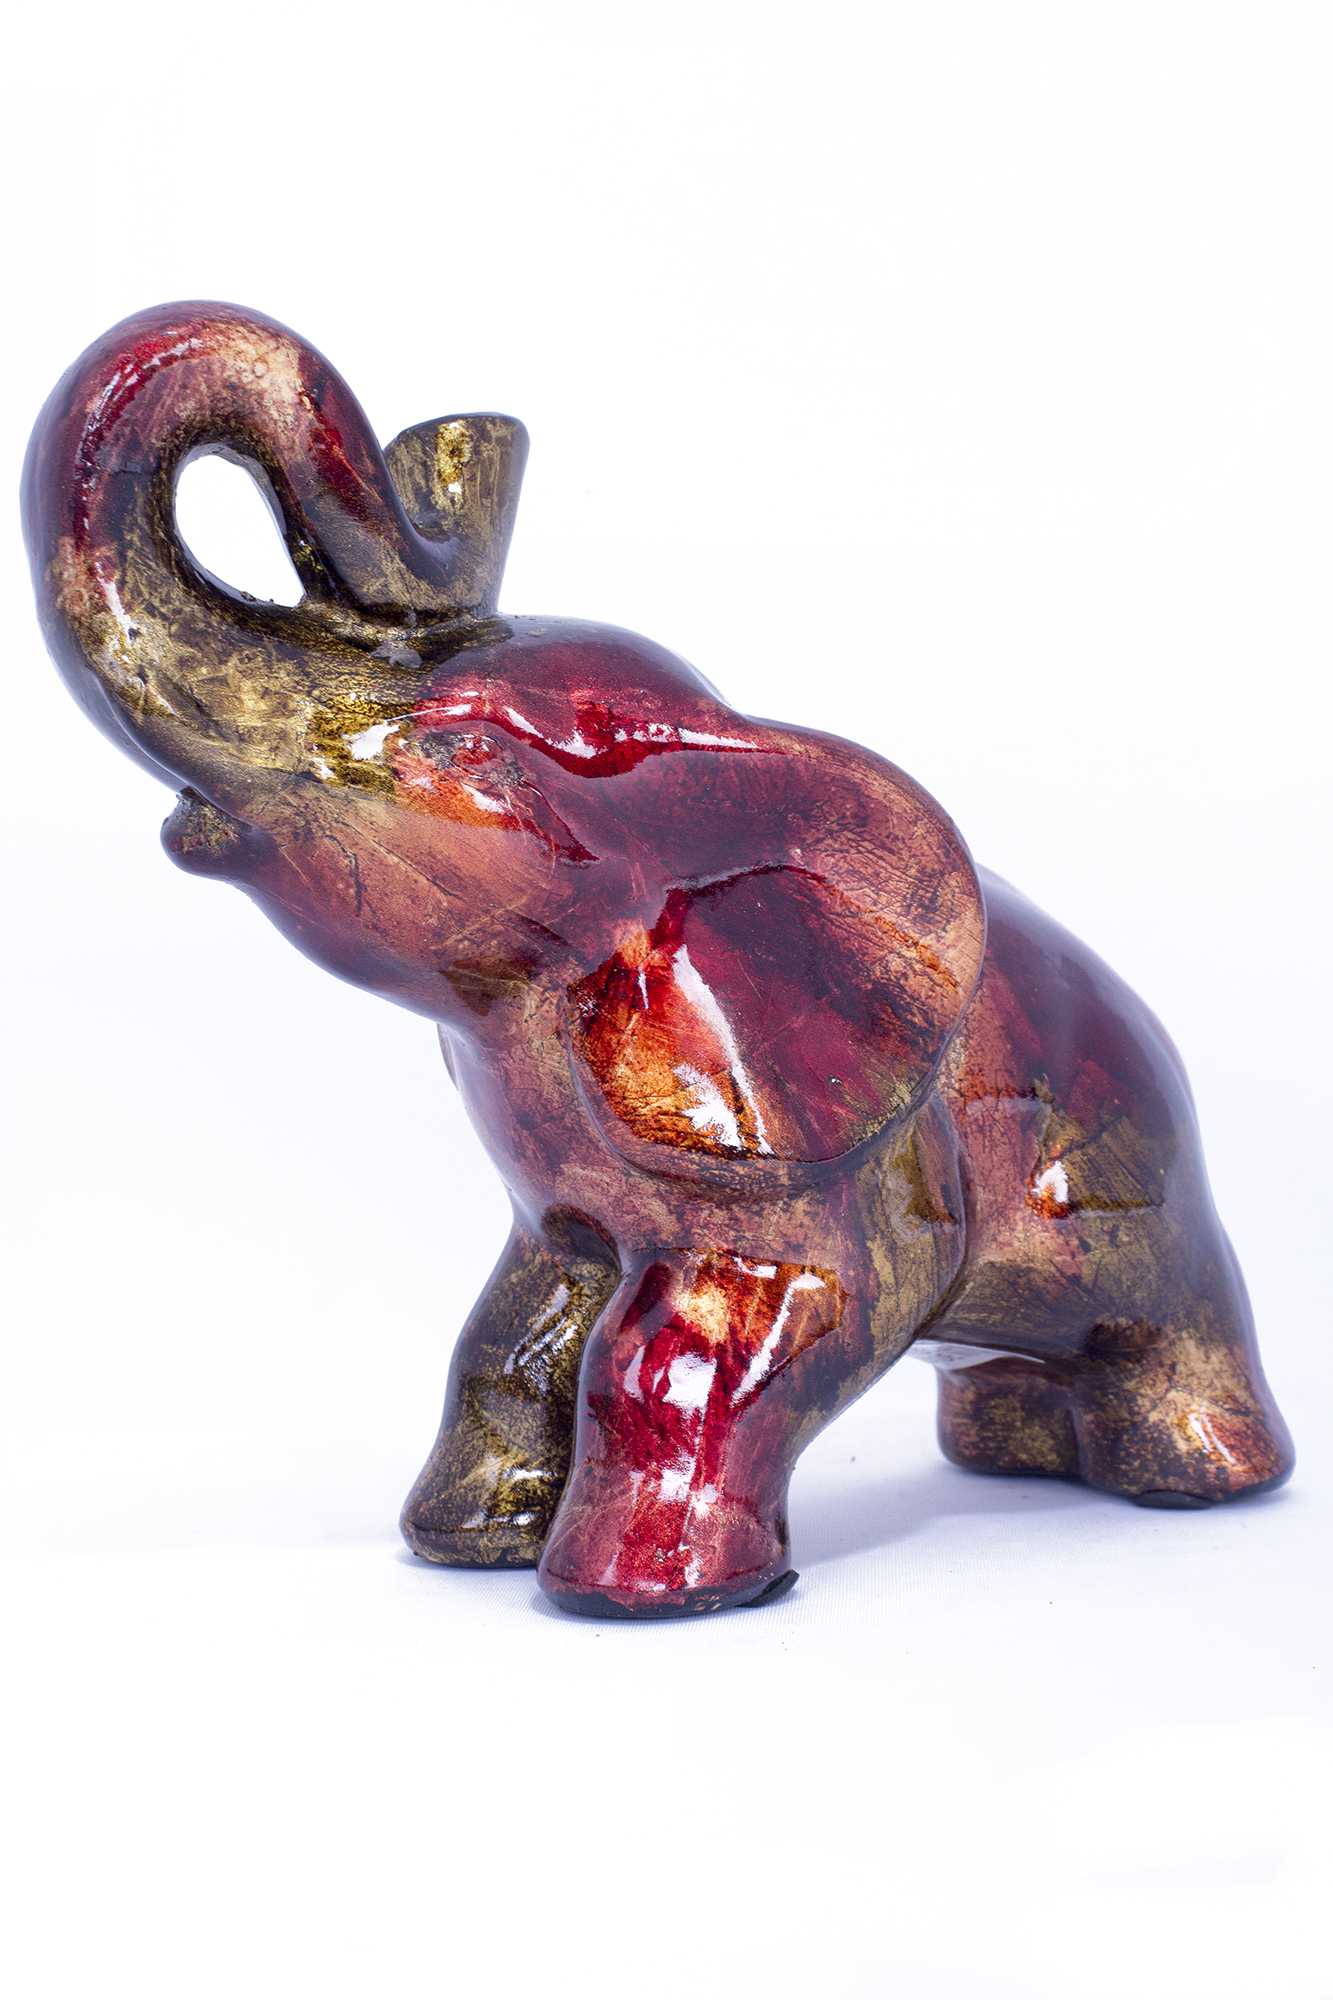 13" X 7" X 12" Copper, Red And Gold Ceramic Elephhant